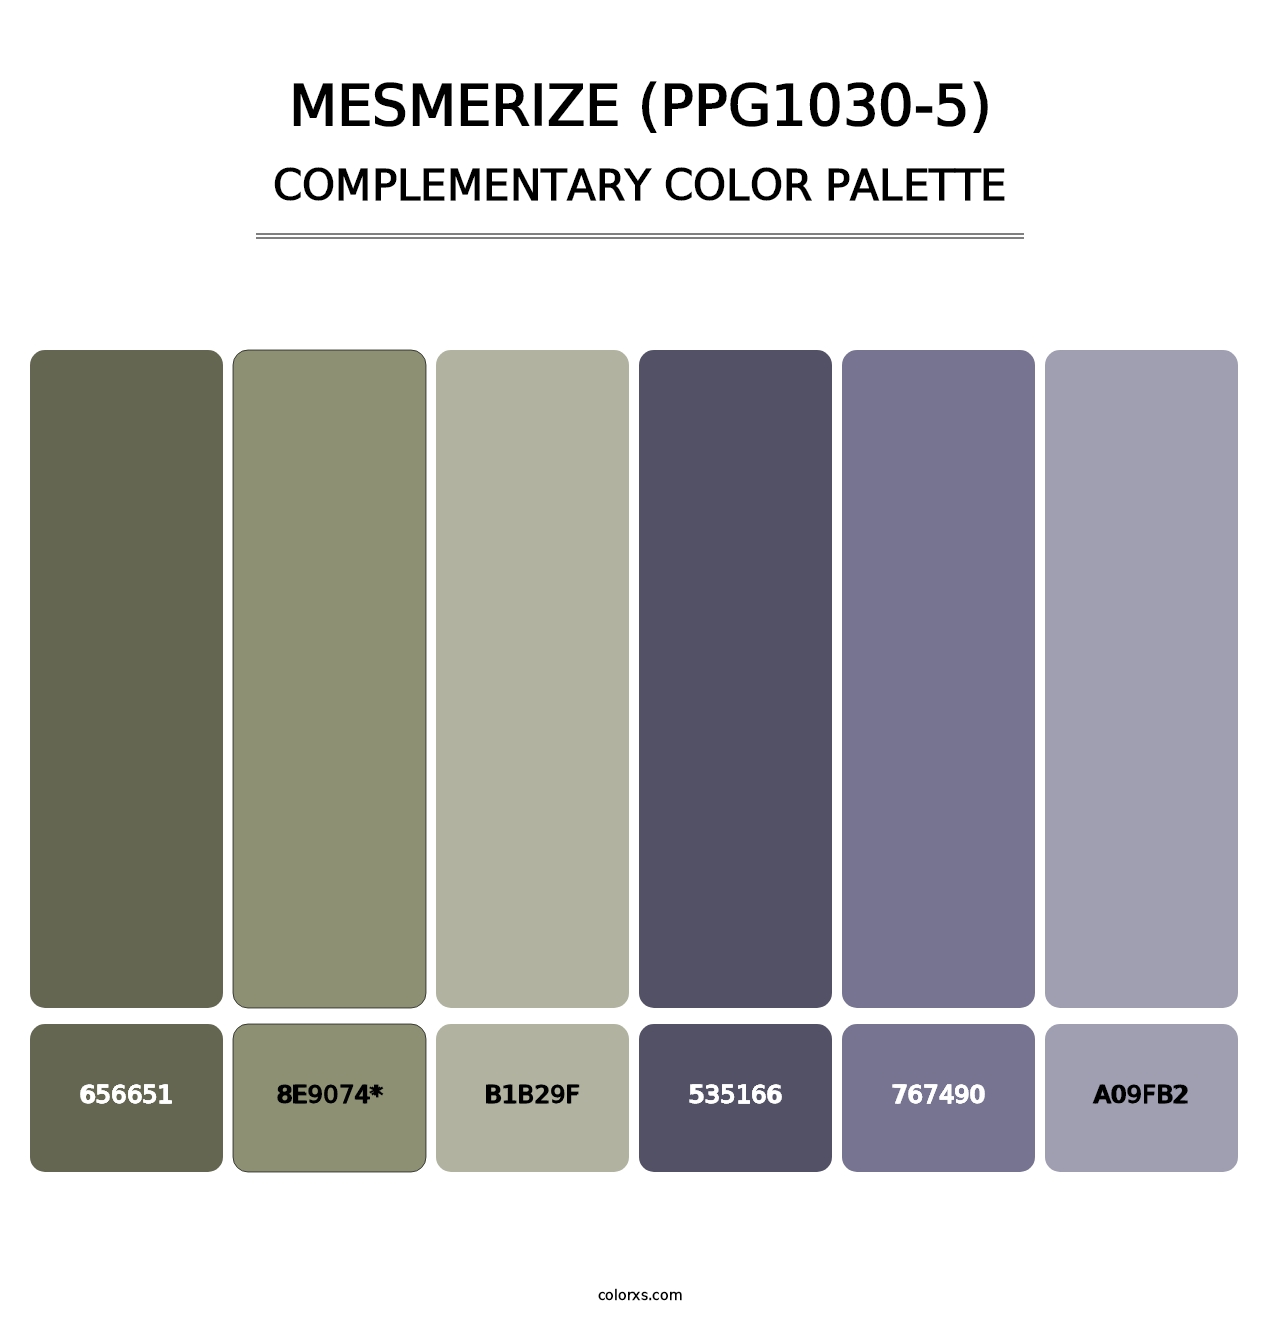 Mesmerize (PPG1030-5) - Complementary Color Palette